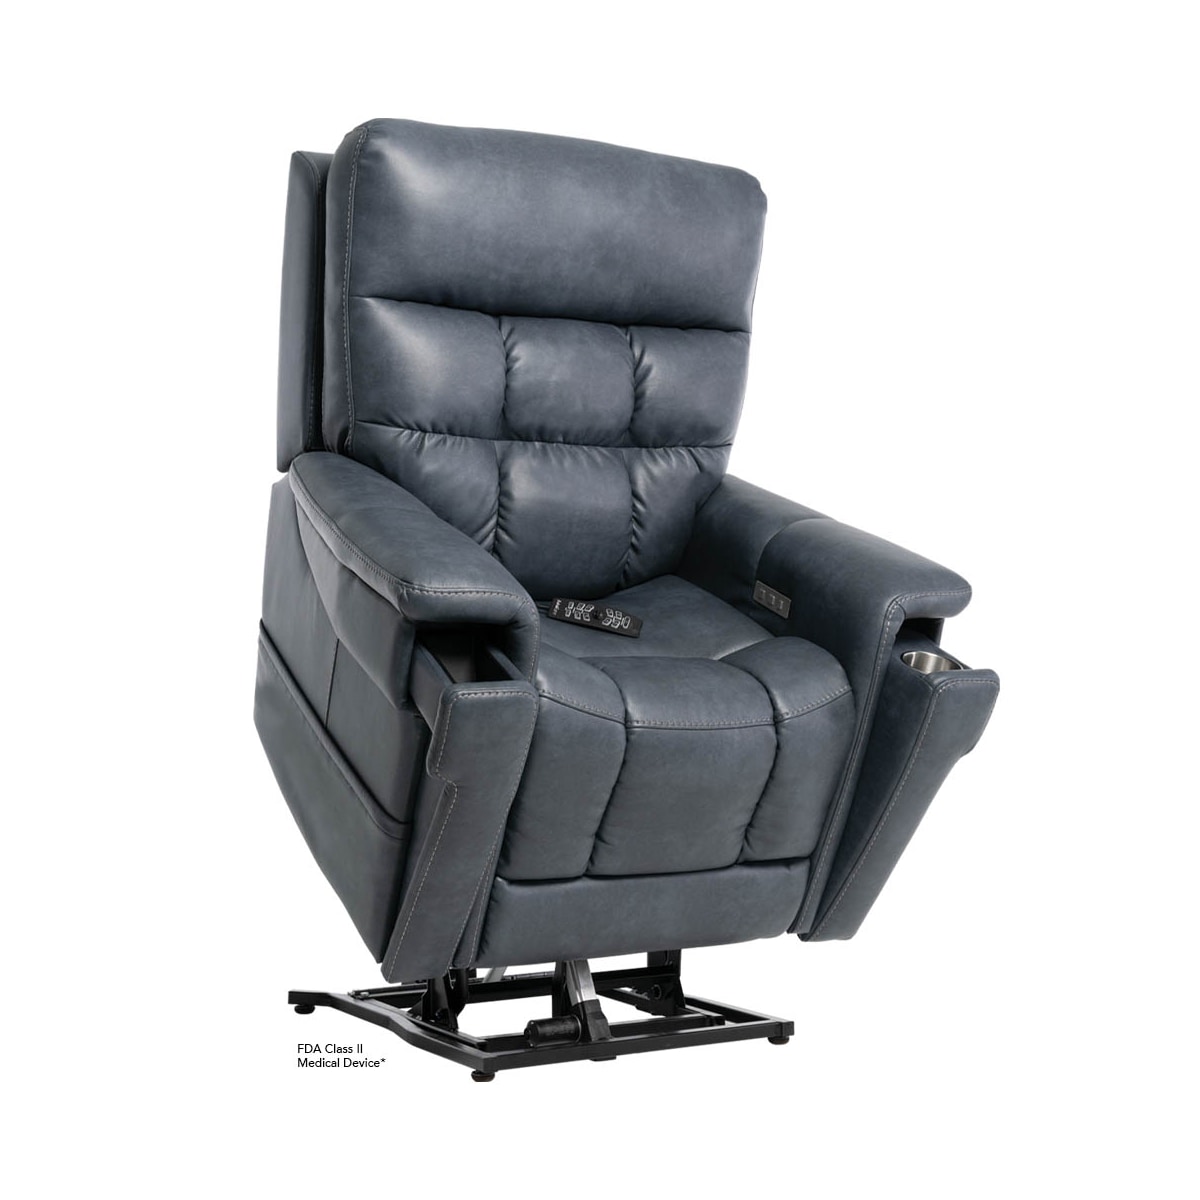 Pride Vivalift! Ultra recliner lift chair in slate gray, lifted position